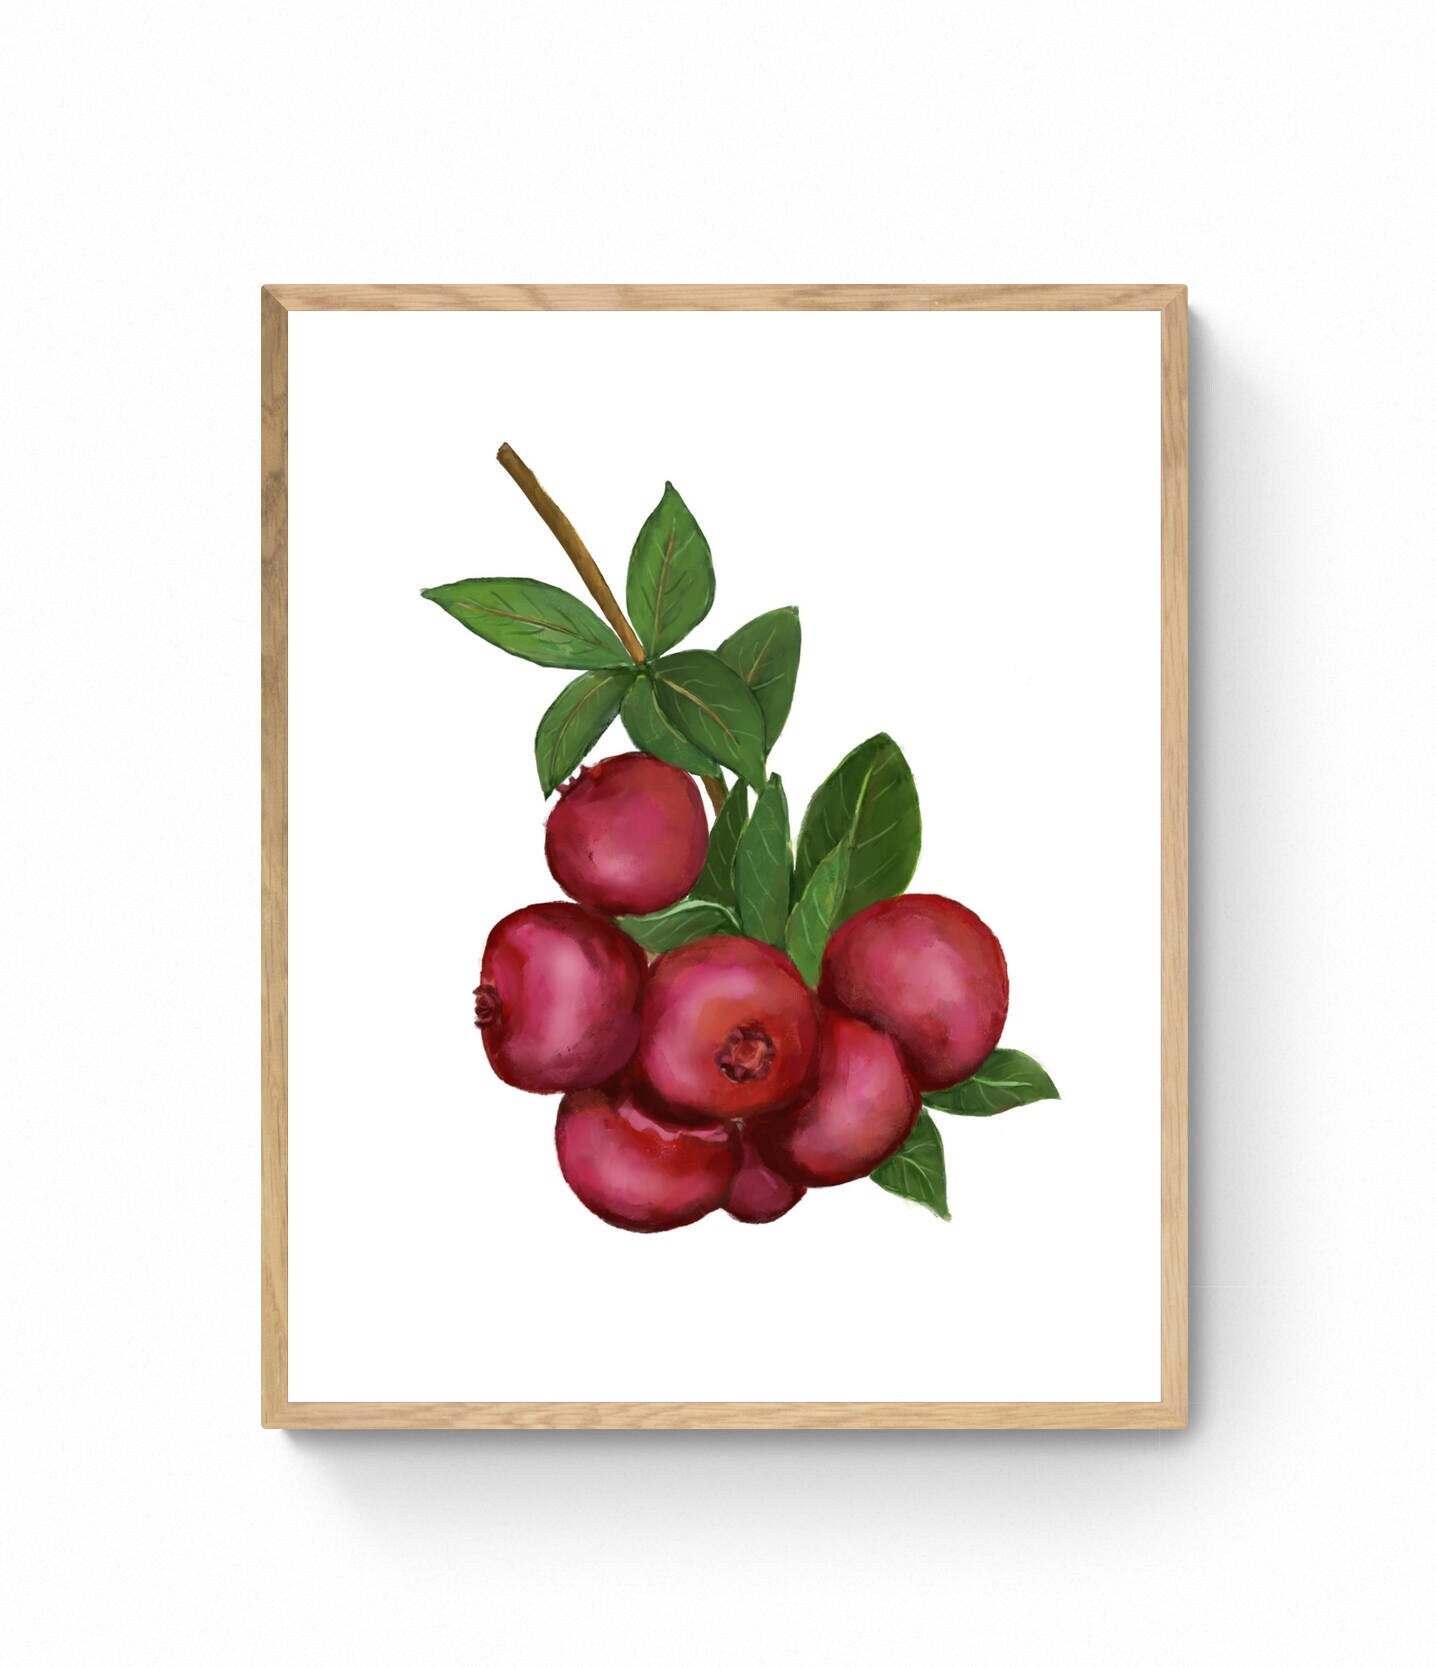 Set of 2 Cranberry Blueberry Art Print, Kitchen Wall Hanging, Dining Room Decor, Berry Painting, Fruit Illustration, Farmhouse Wall Decor